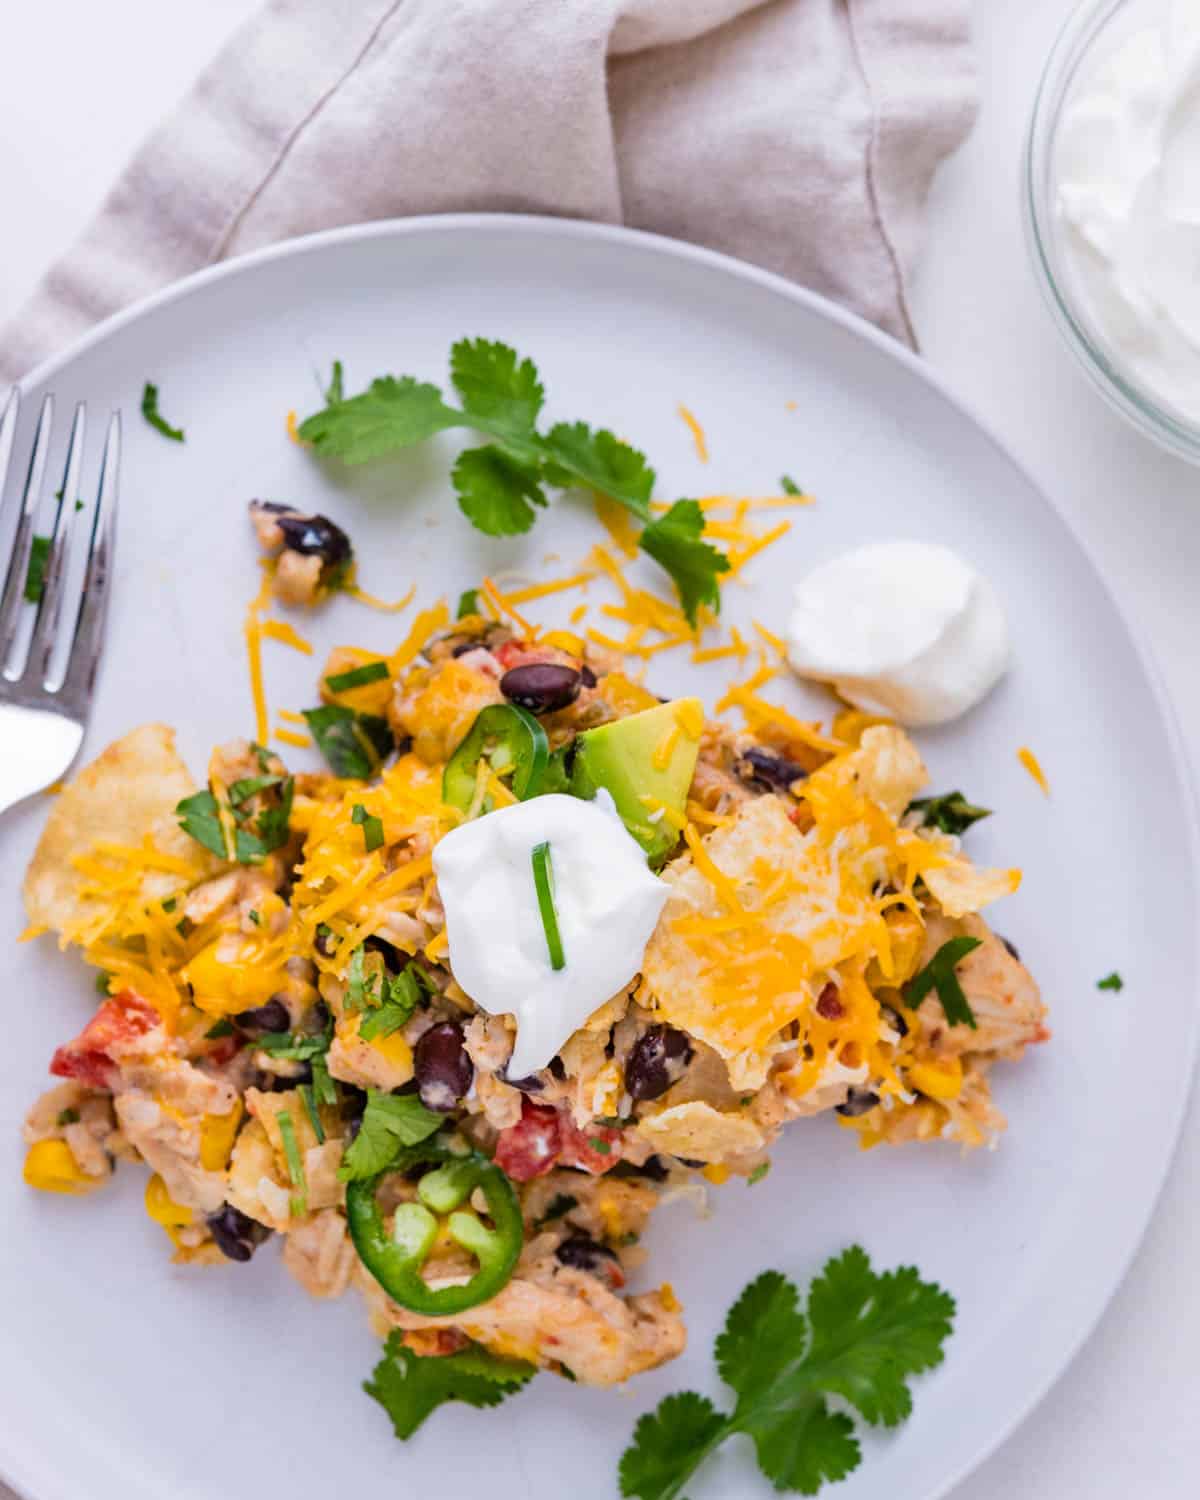 A serving of the Mexican casserole recipe.